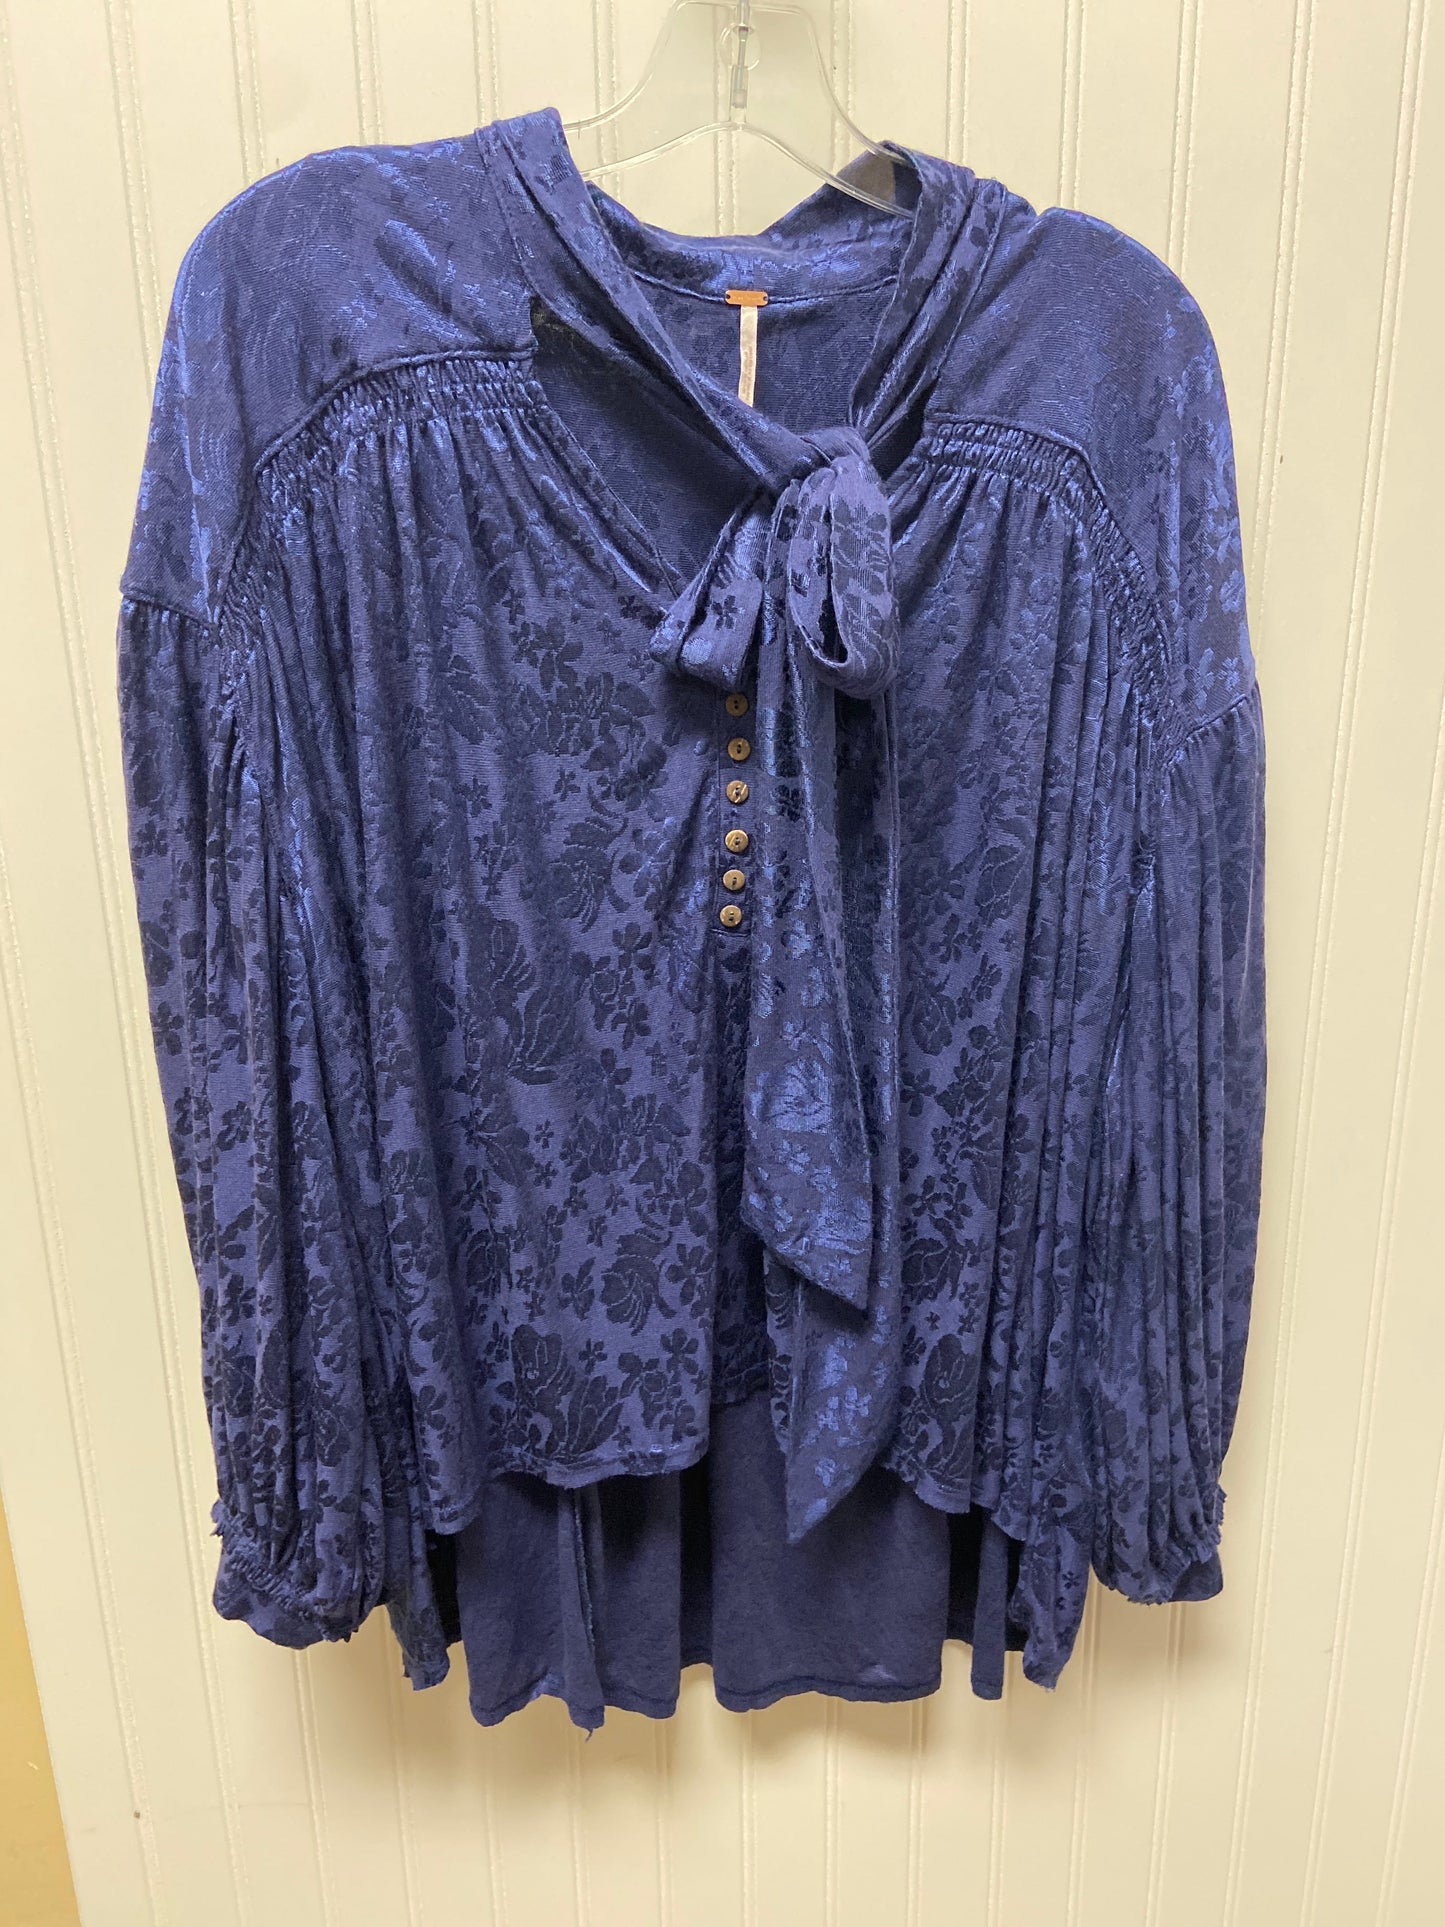 Blue Blouse 3/4 Sleeve Free People, Size S